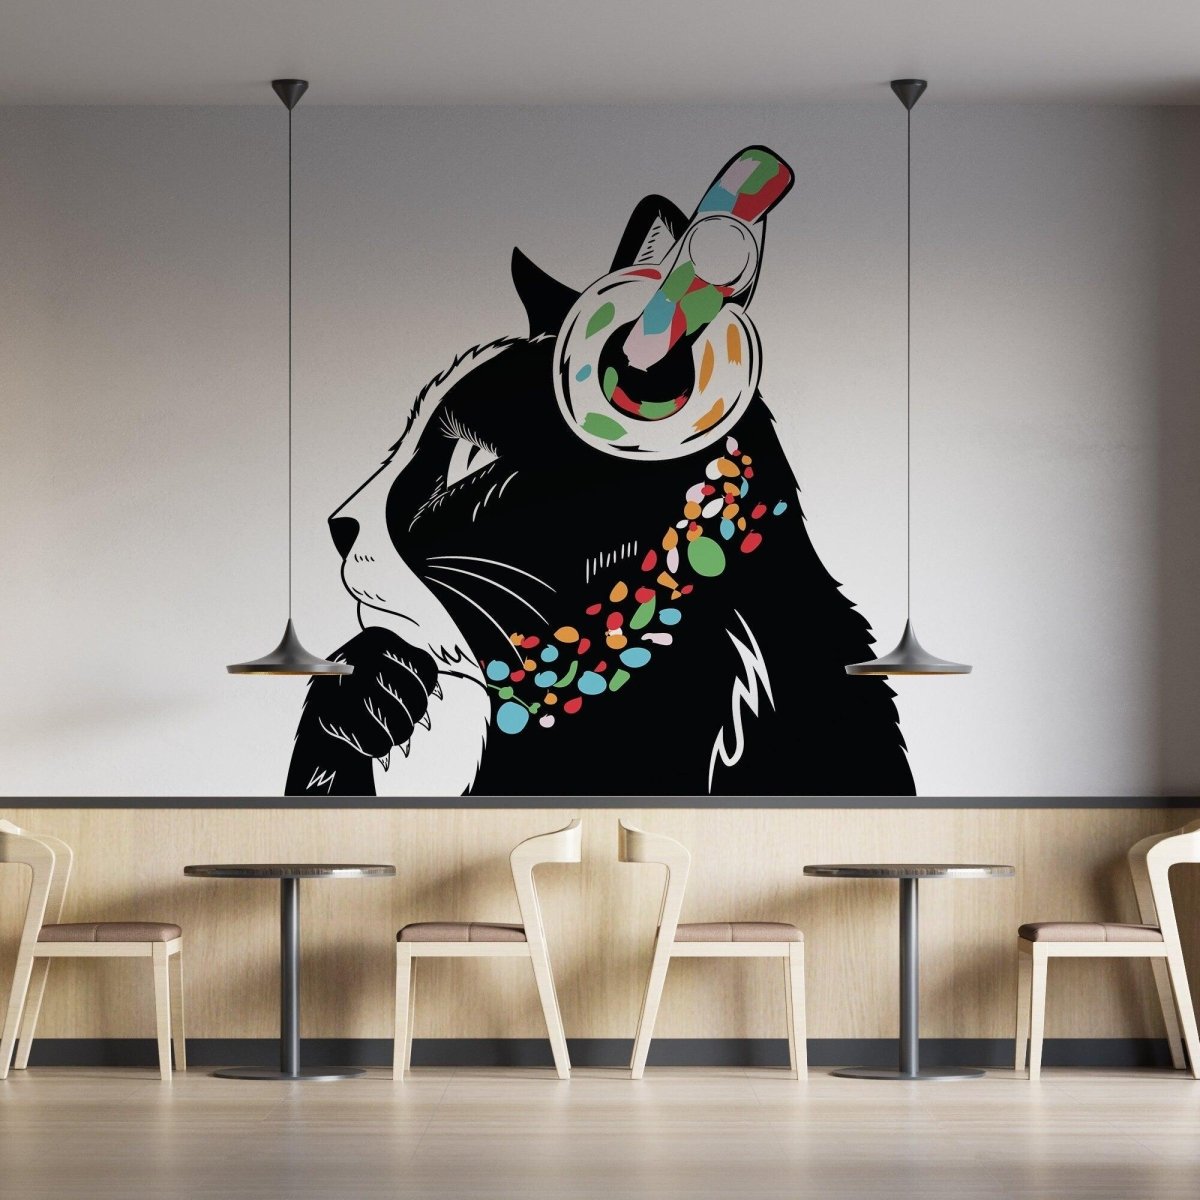 Contemplative Feline Wall Decal - Inspired by Urban Art - Decords